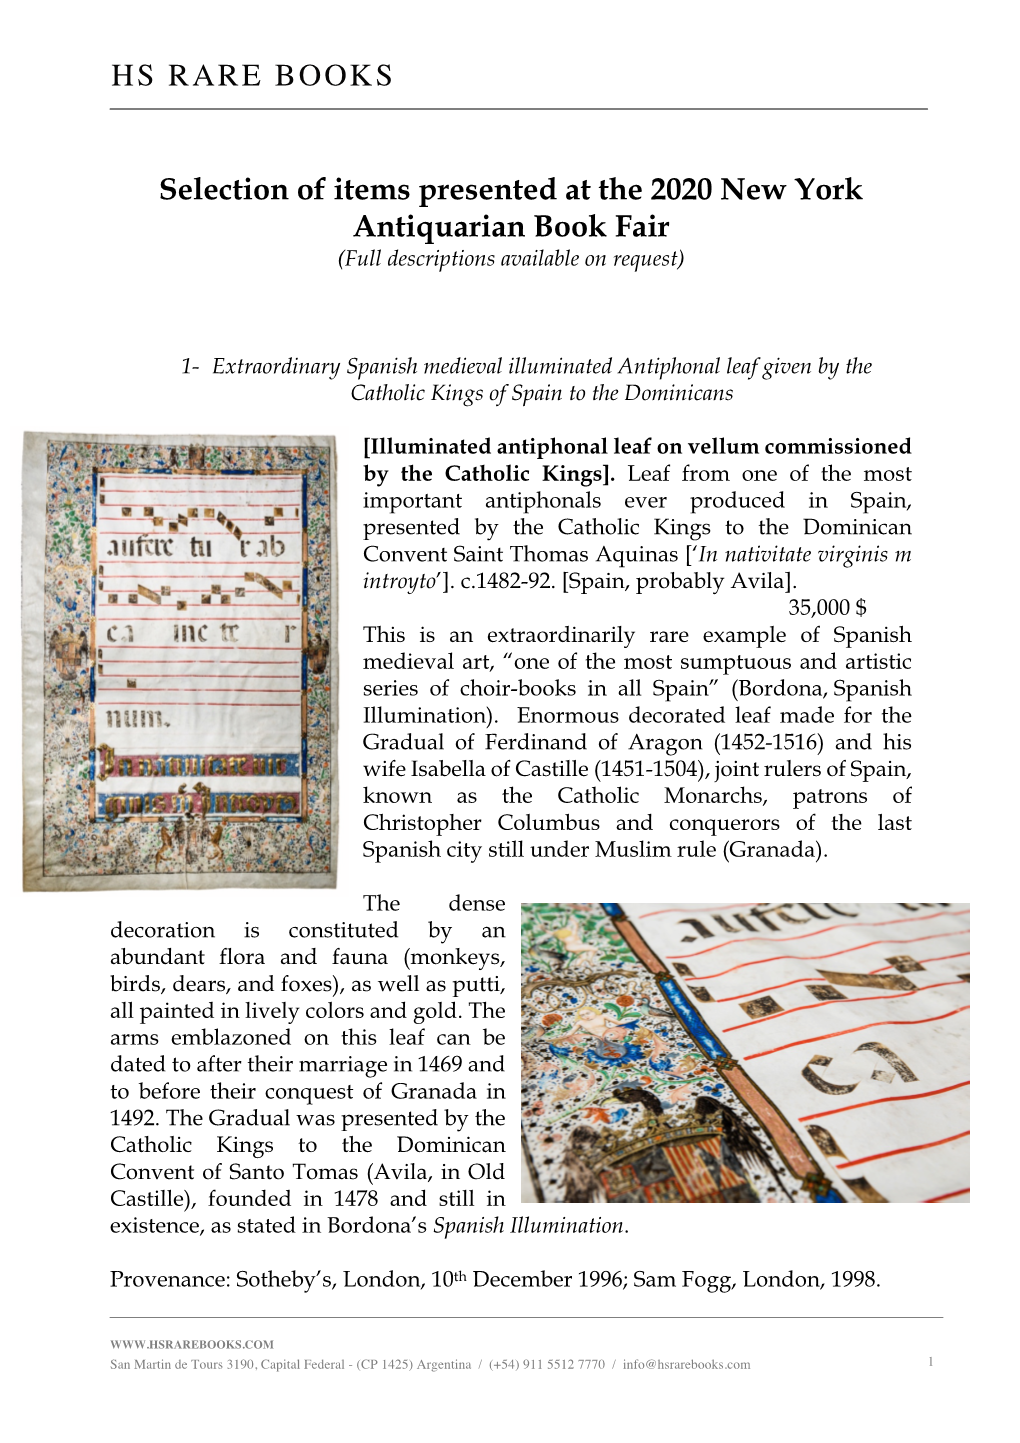 Selection of Items Presented at the 2020 New York Antiquarian Book Fair (Full Descriptions Available on Request)